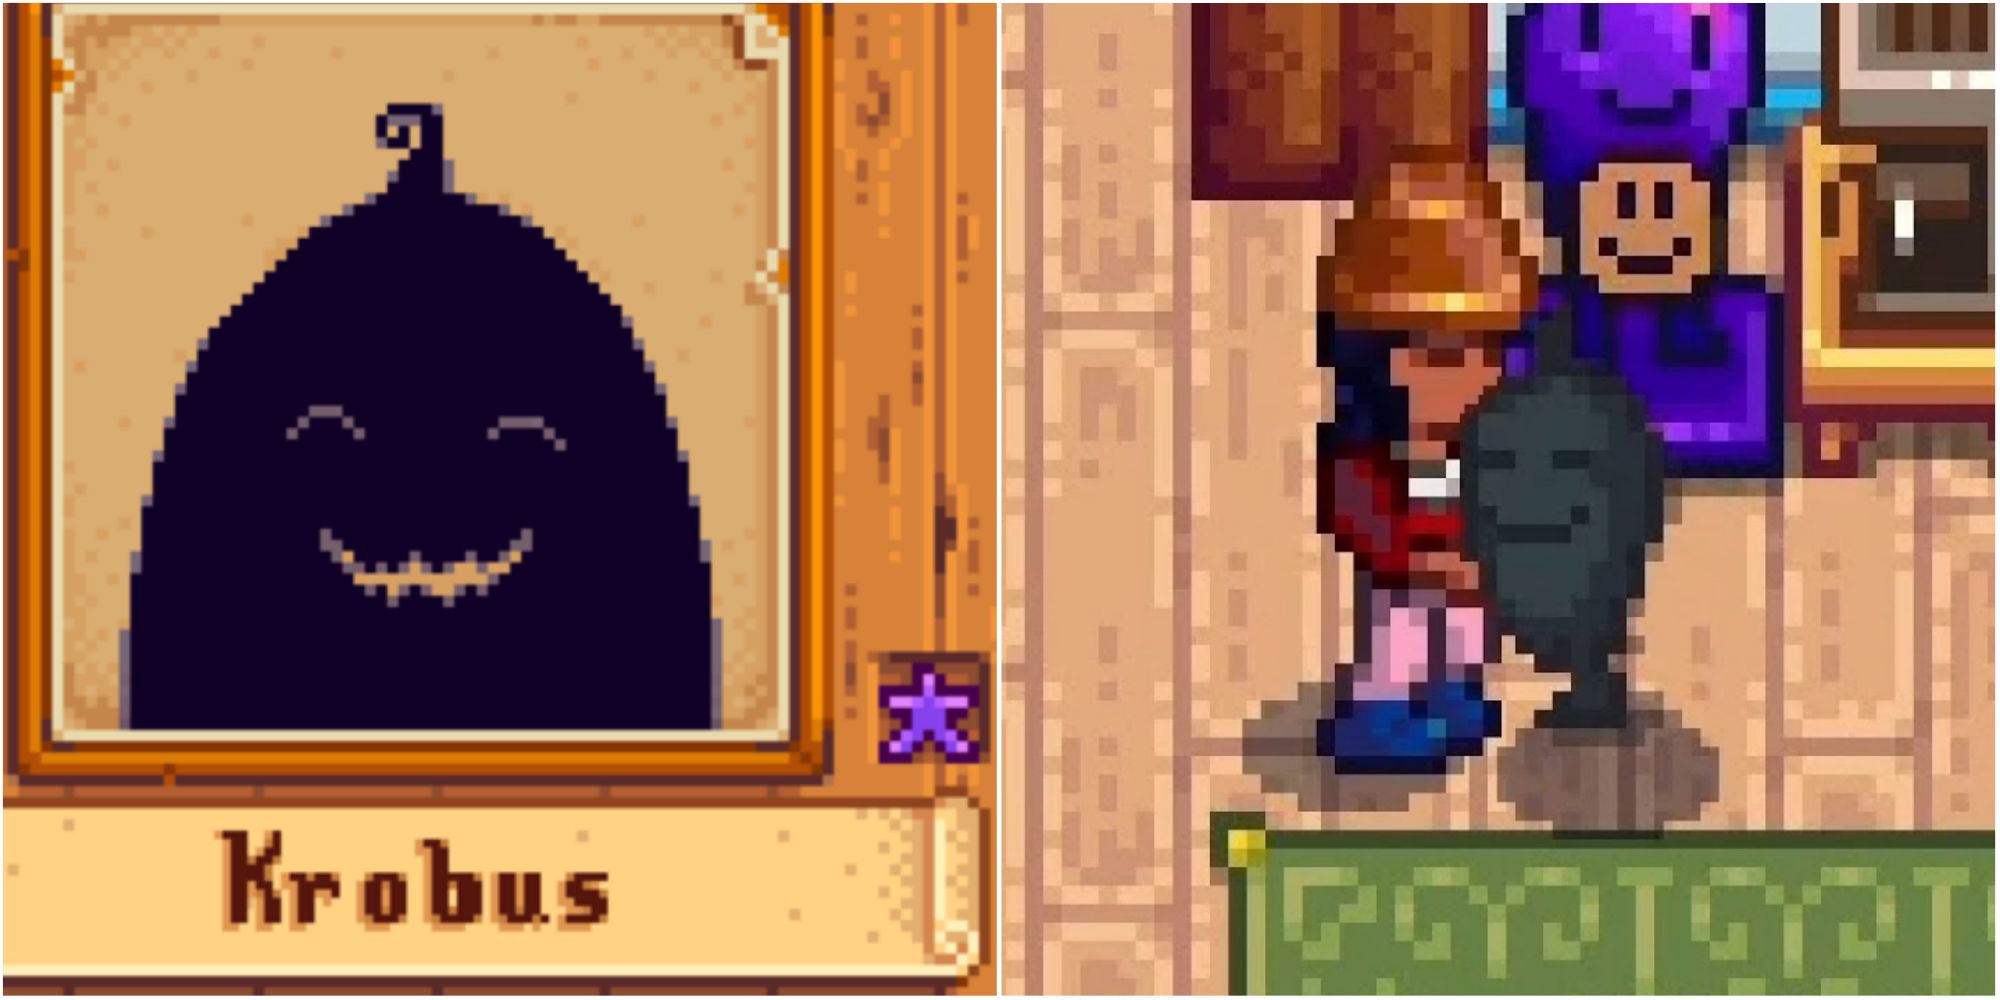 Split images of Krobus from Stardew Valley smiling and hugging the player.